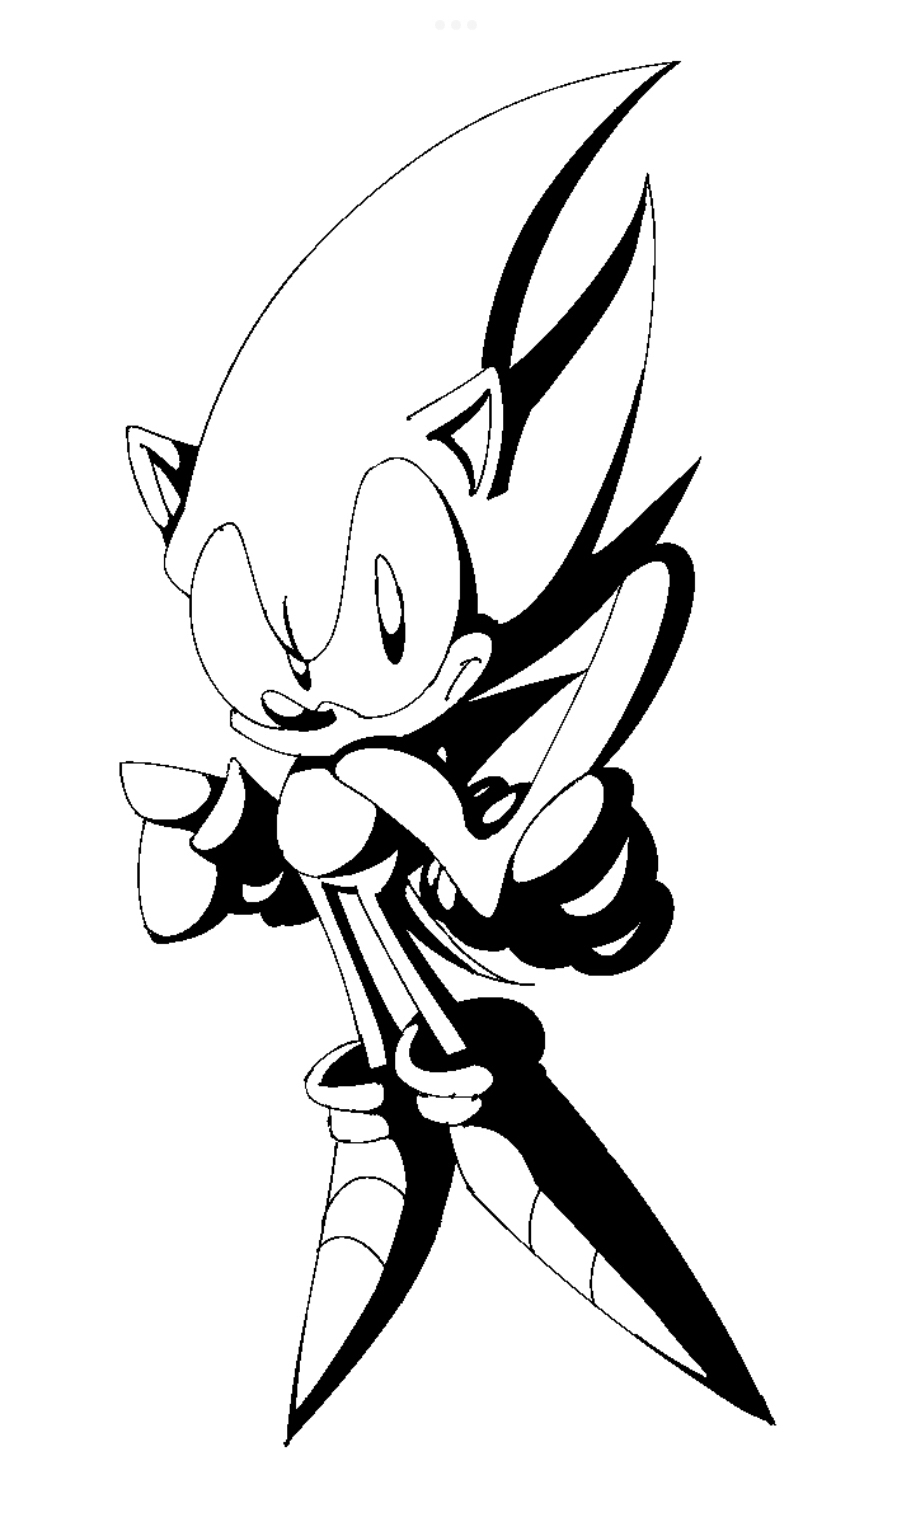 Super sonic by gbshte on